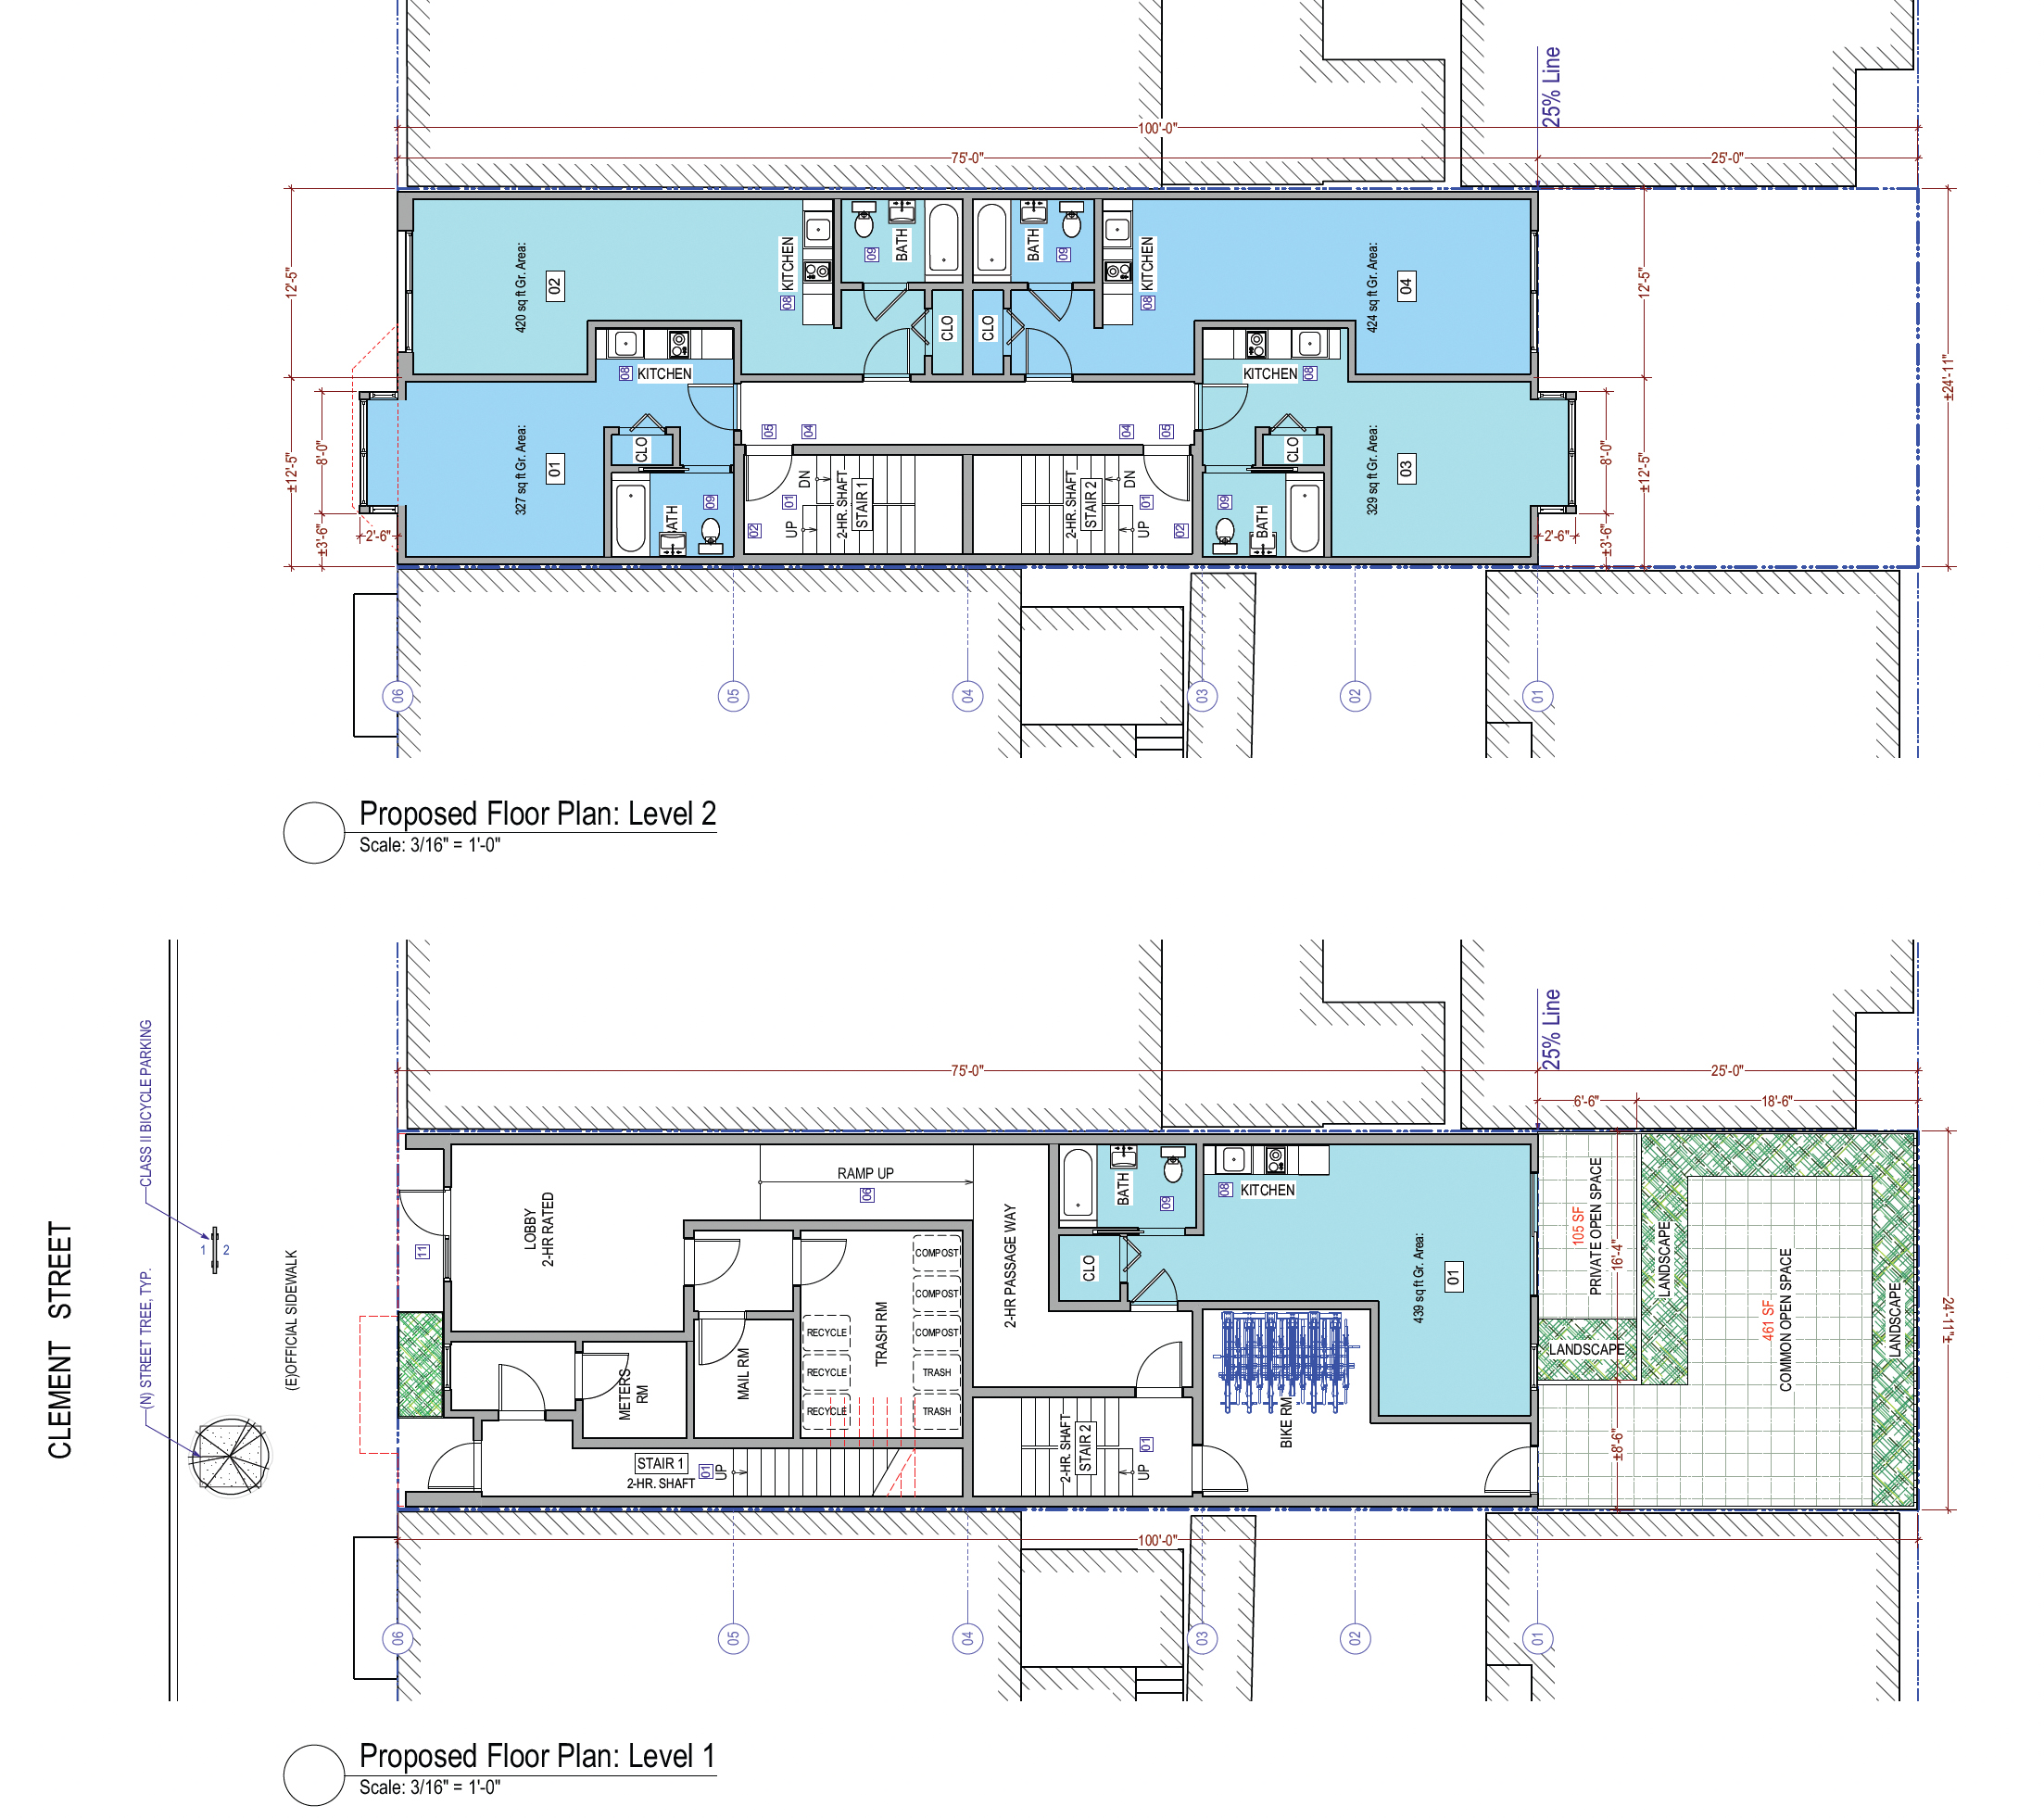 2420-2424 Clement Street floor plans for the first and second levels, illustration by SIA Consulting